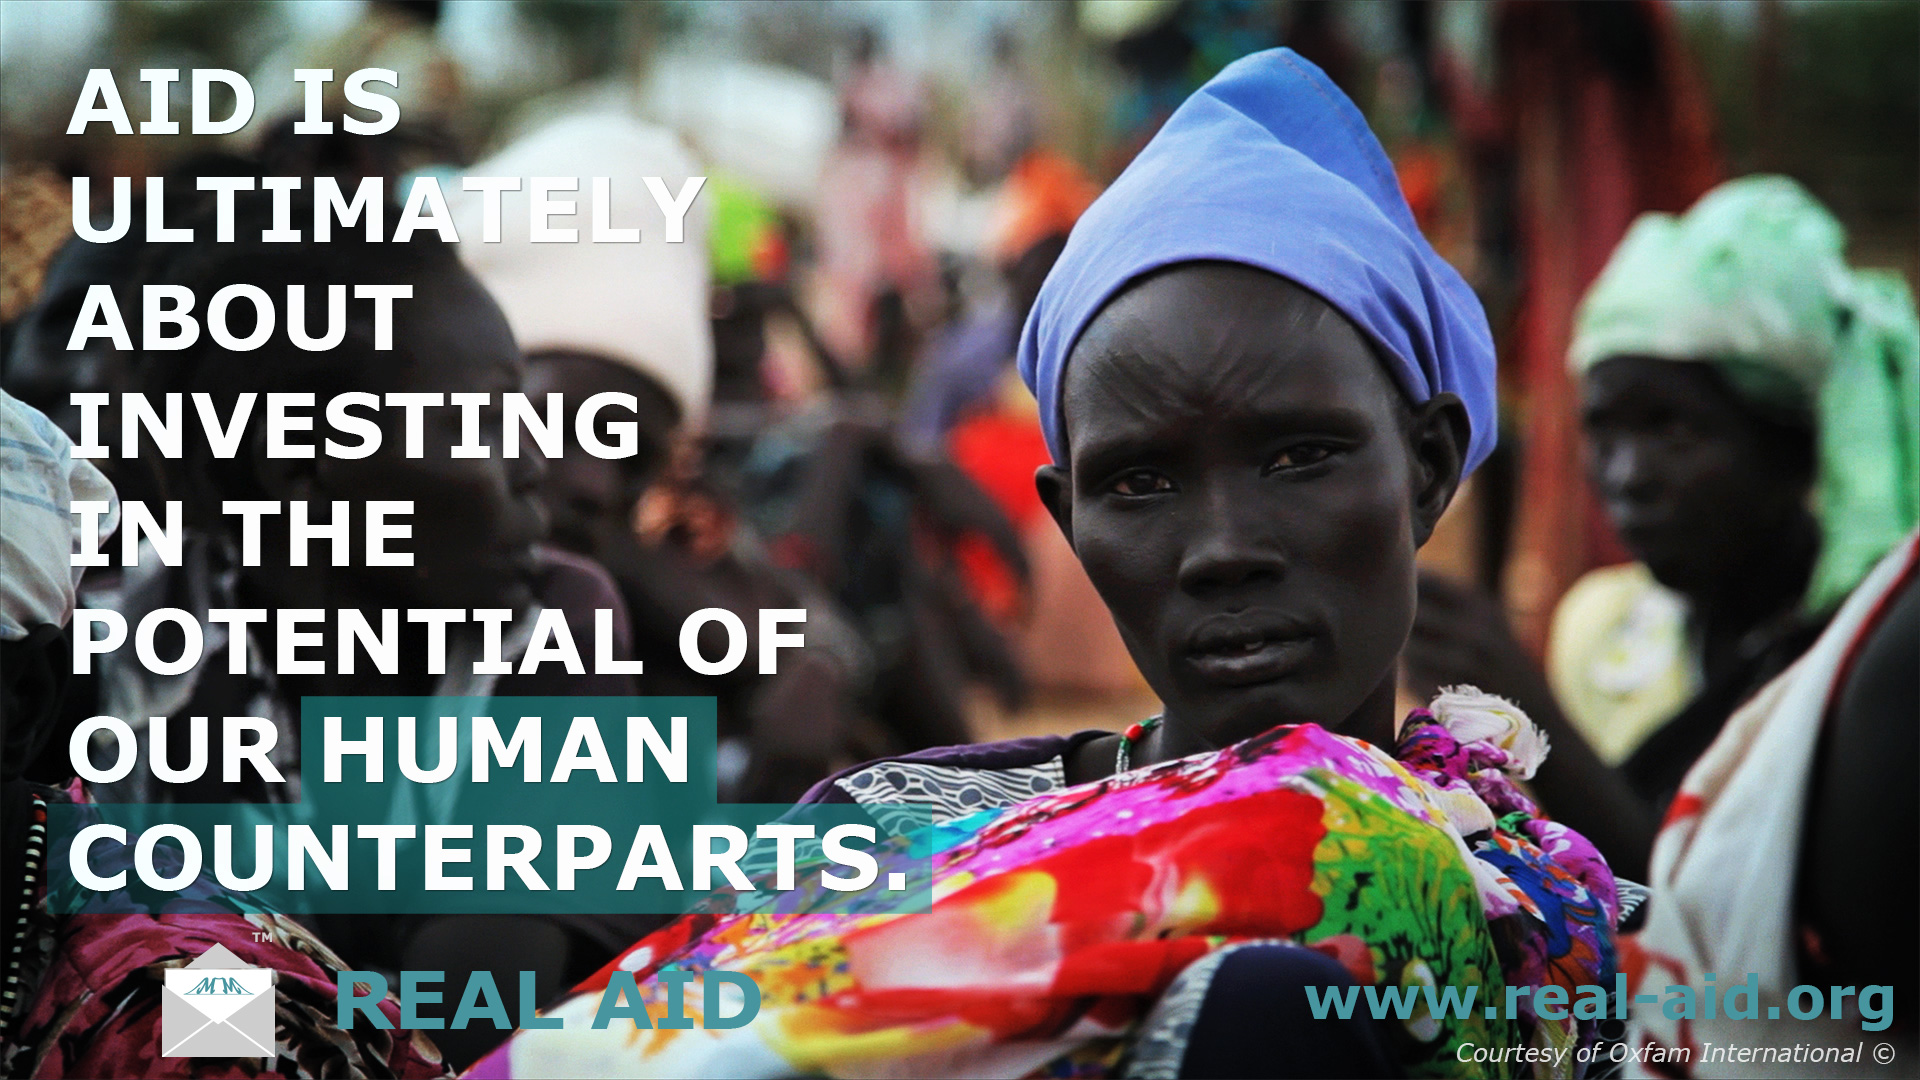 Real Aid poster, Aid is ultimately about investing in the potential of our human counterparts